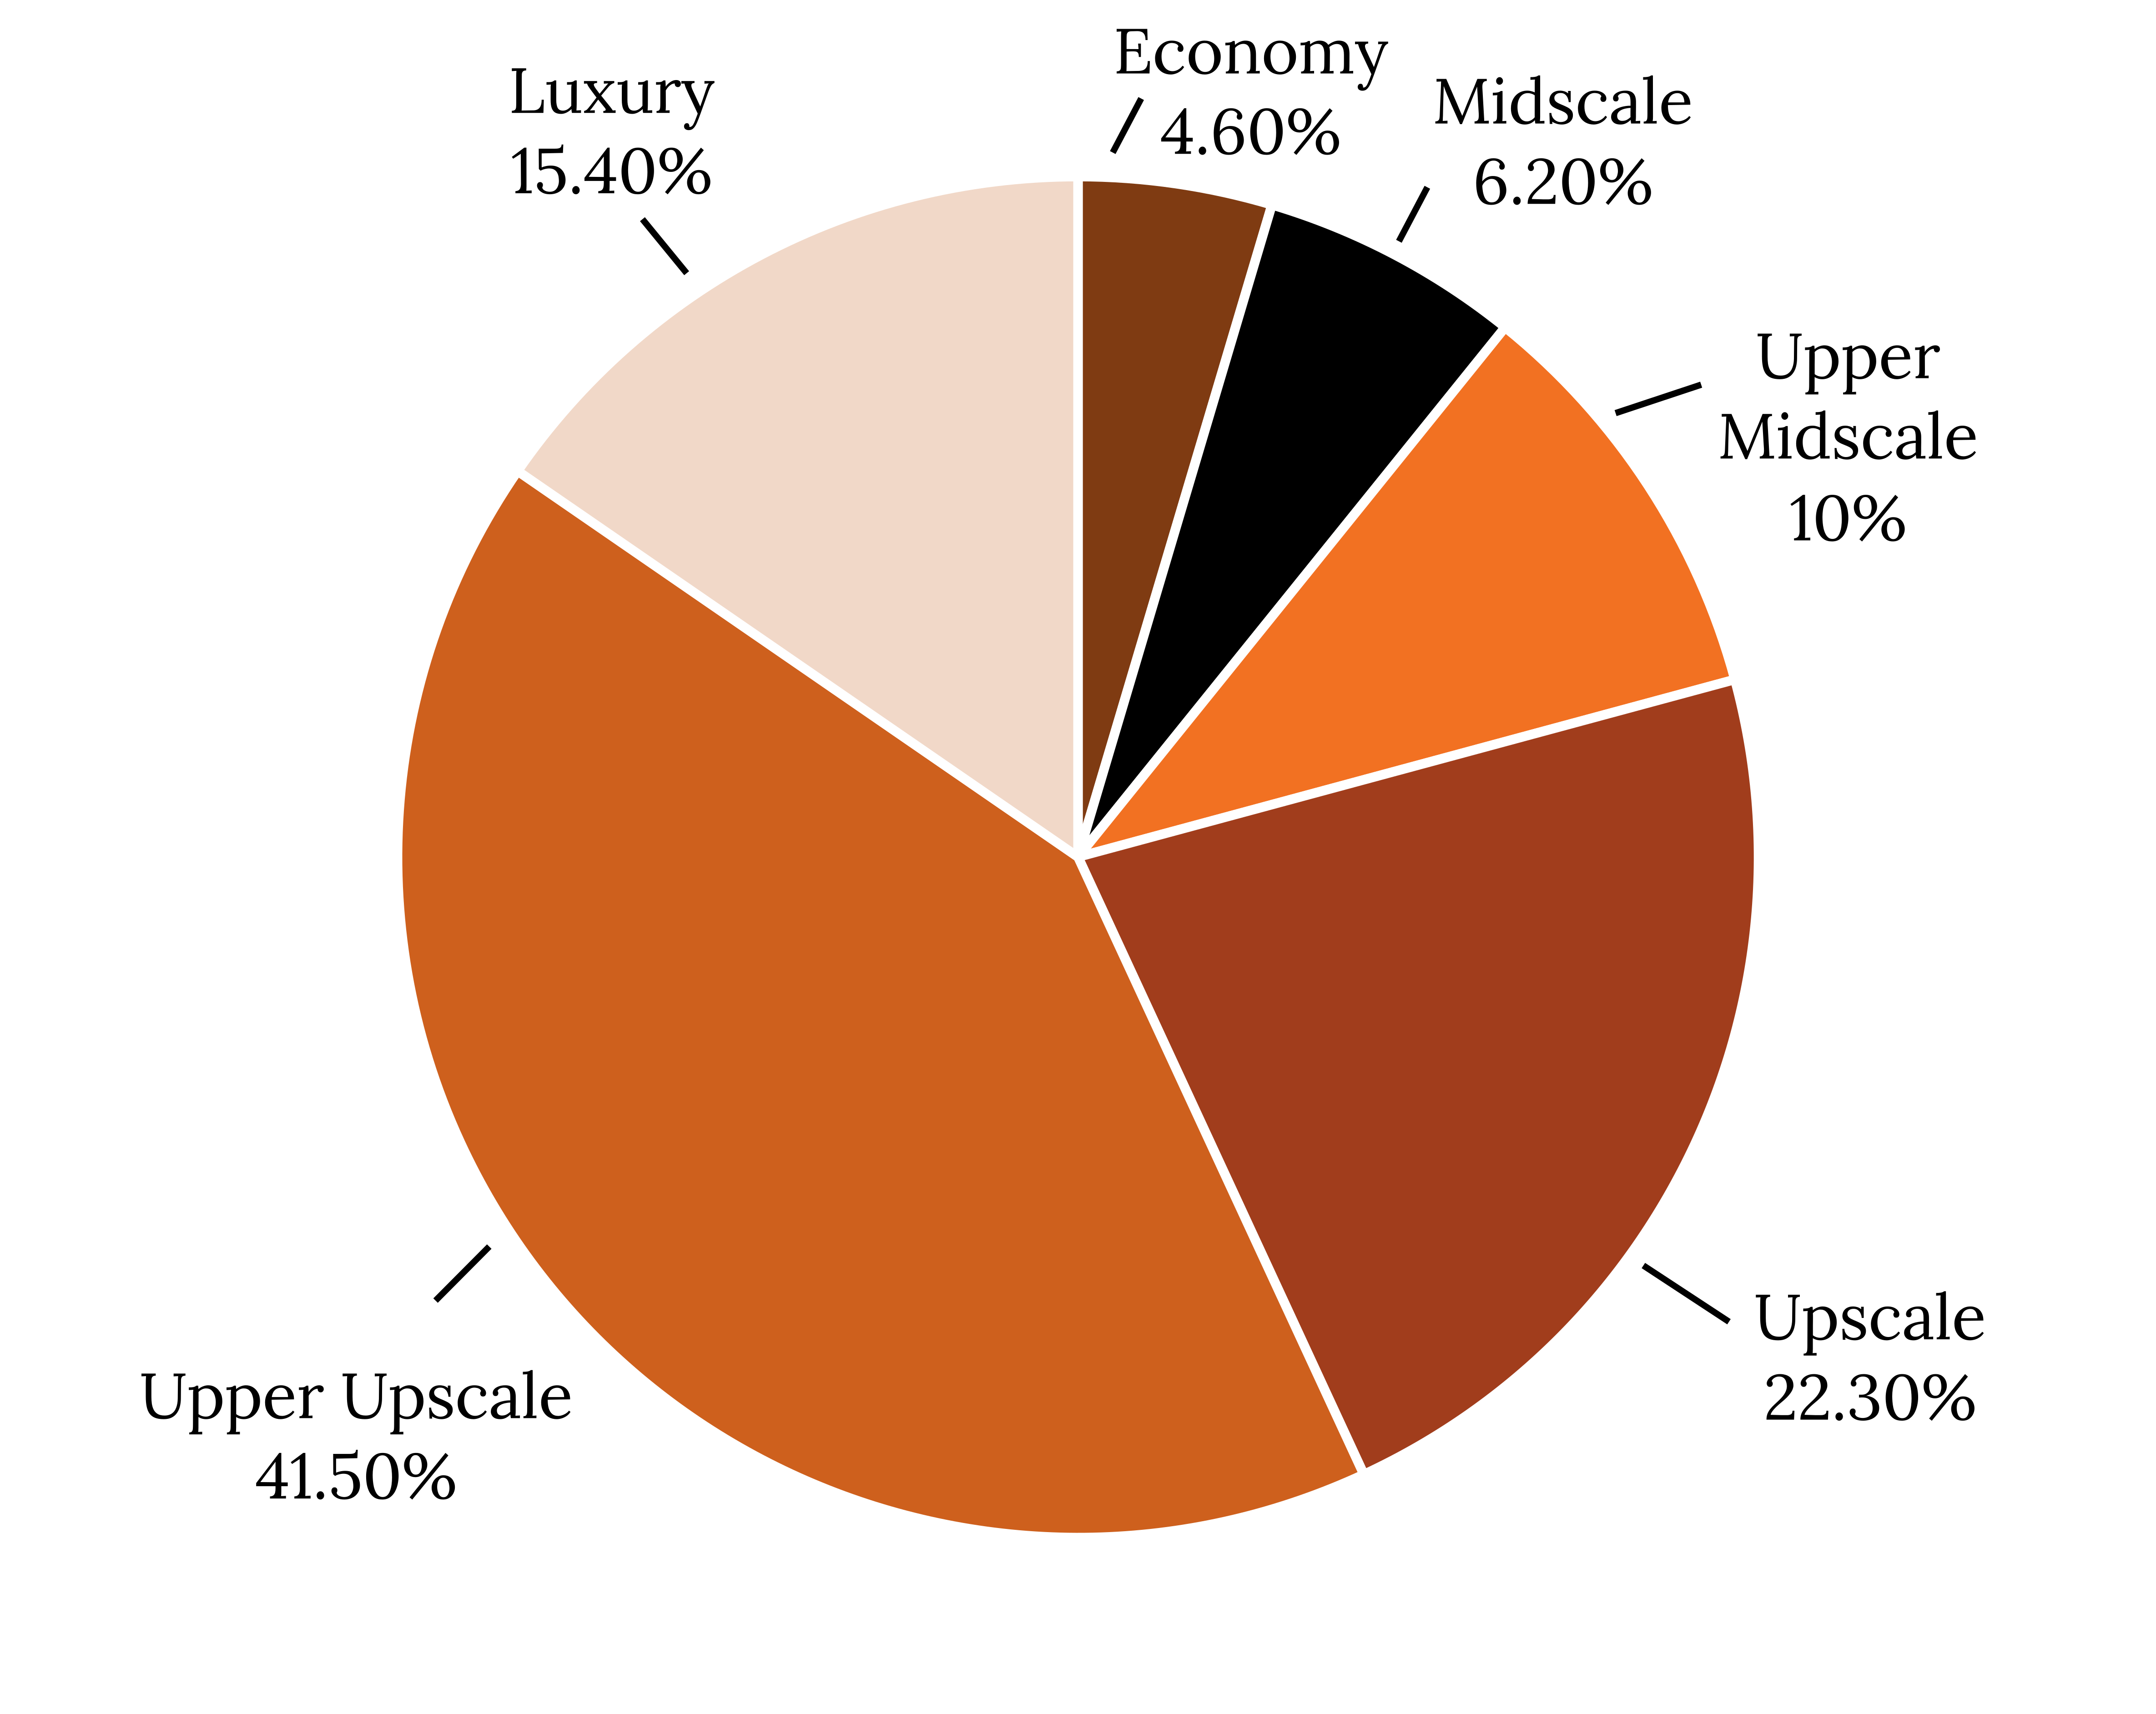 A pie chart indicating hotel market segmentation. From biggest to smallest pie piece: Upper Upscale (41.5%), Upscale (22.3%), Luxury (15.4%), Upper Midscale (10%), Midscale (6.2%), Economy (4.6%).